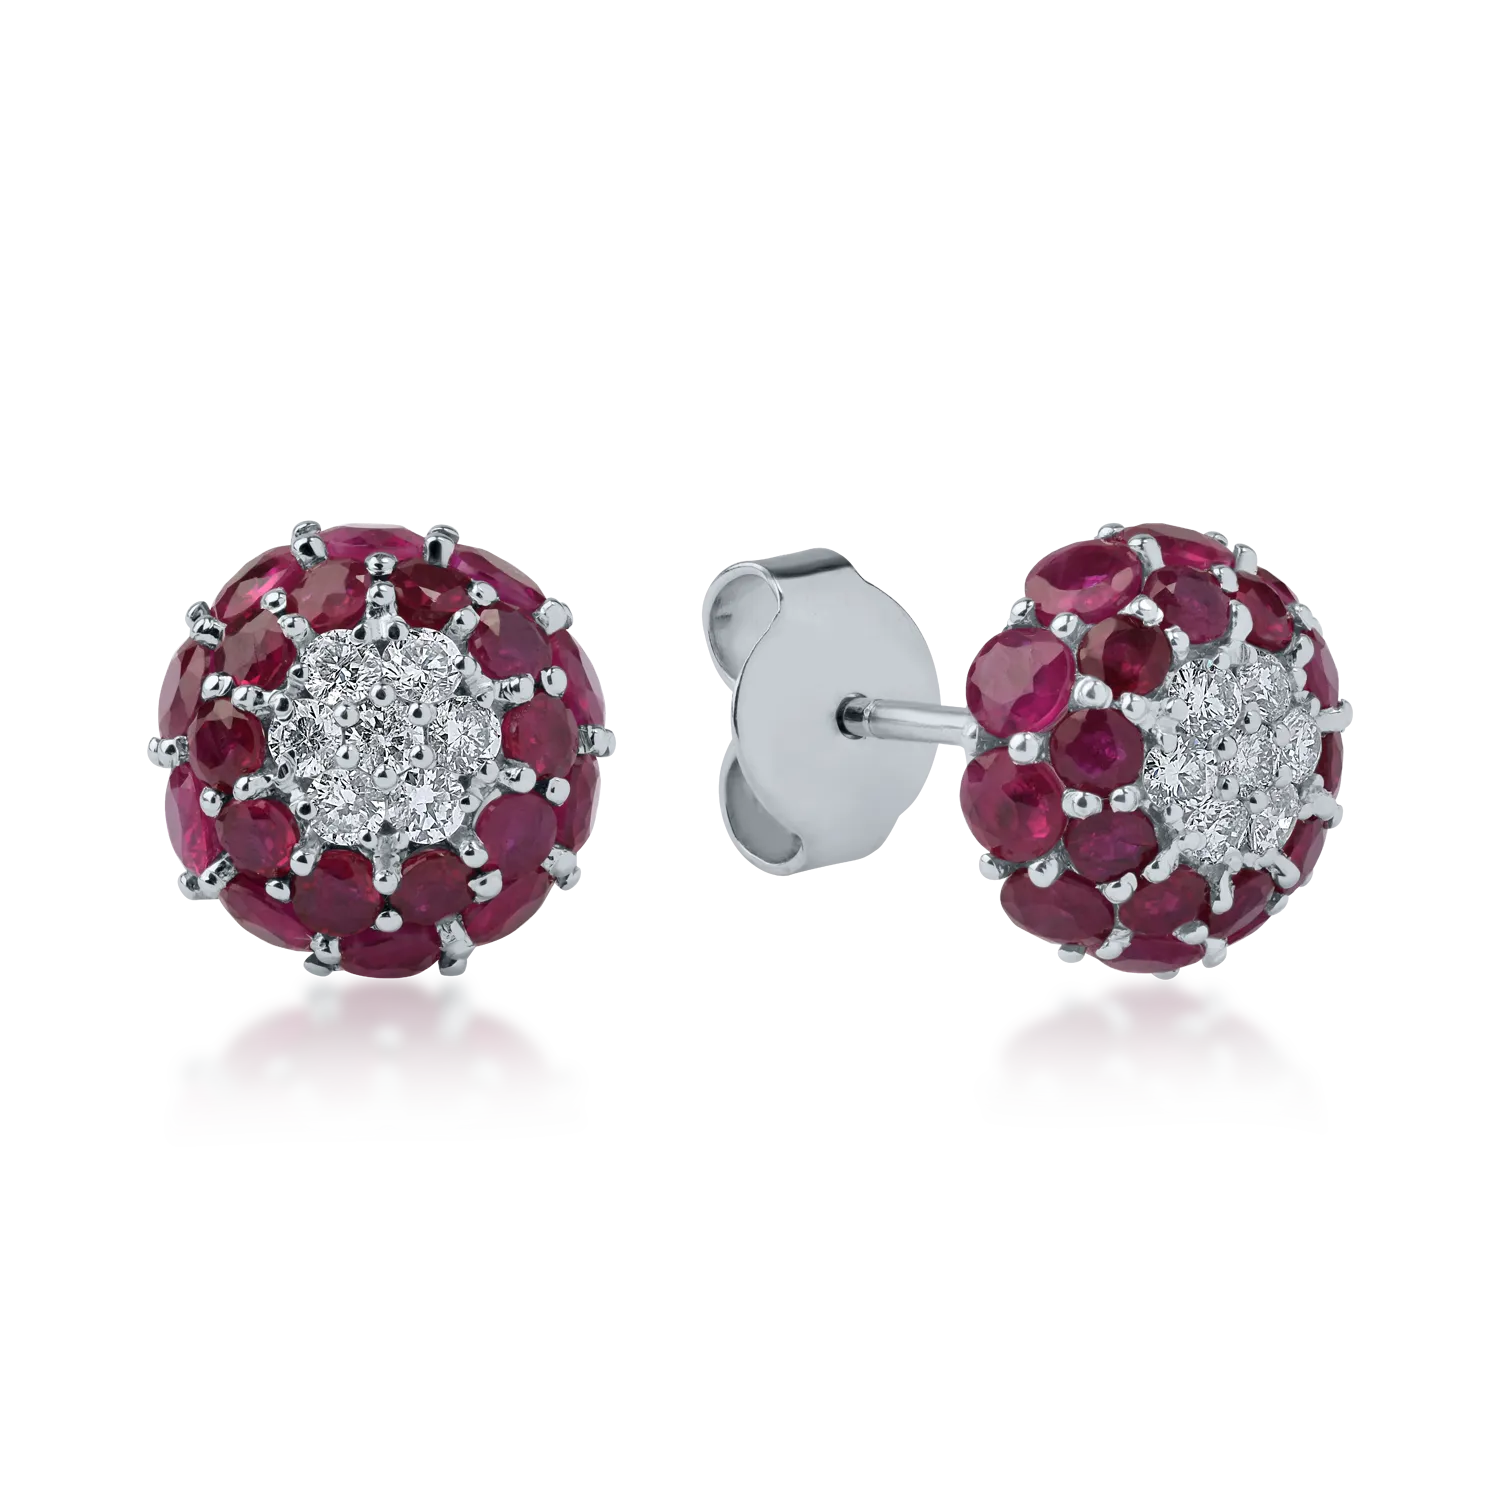 White gold earrings with 3.43ct rubies and 0.31ct diamonds